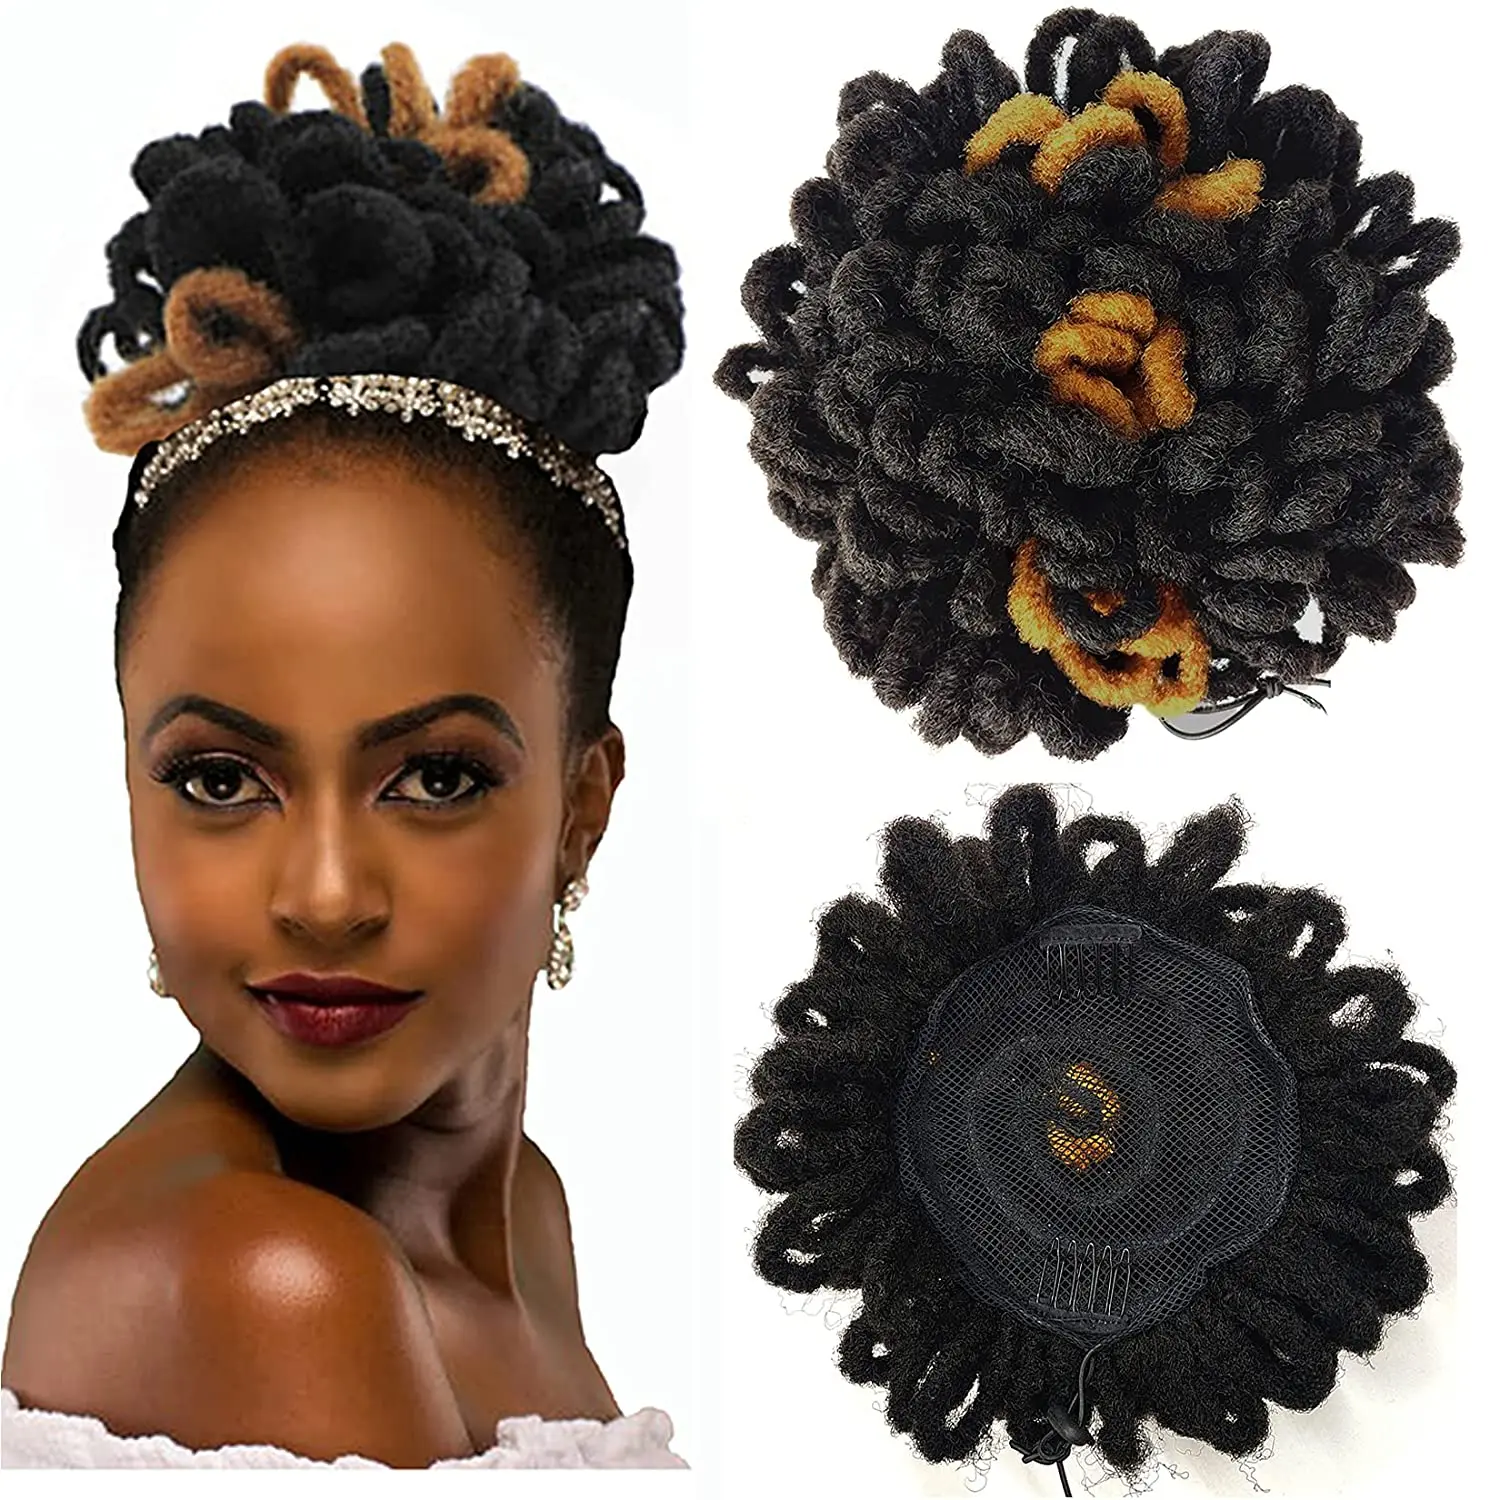 

Hairpiece hair afro puff curly dreadlocks chignon bun for black women updo hair piece drawstring ponytail extensions